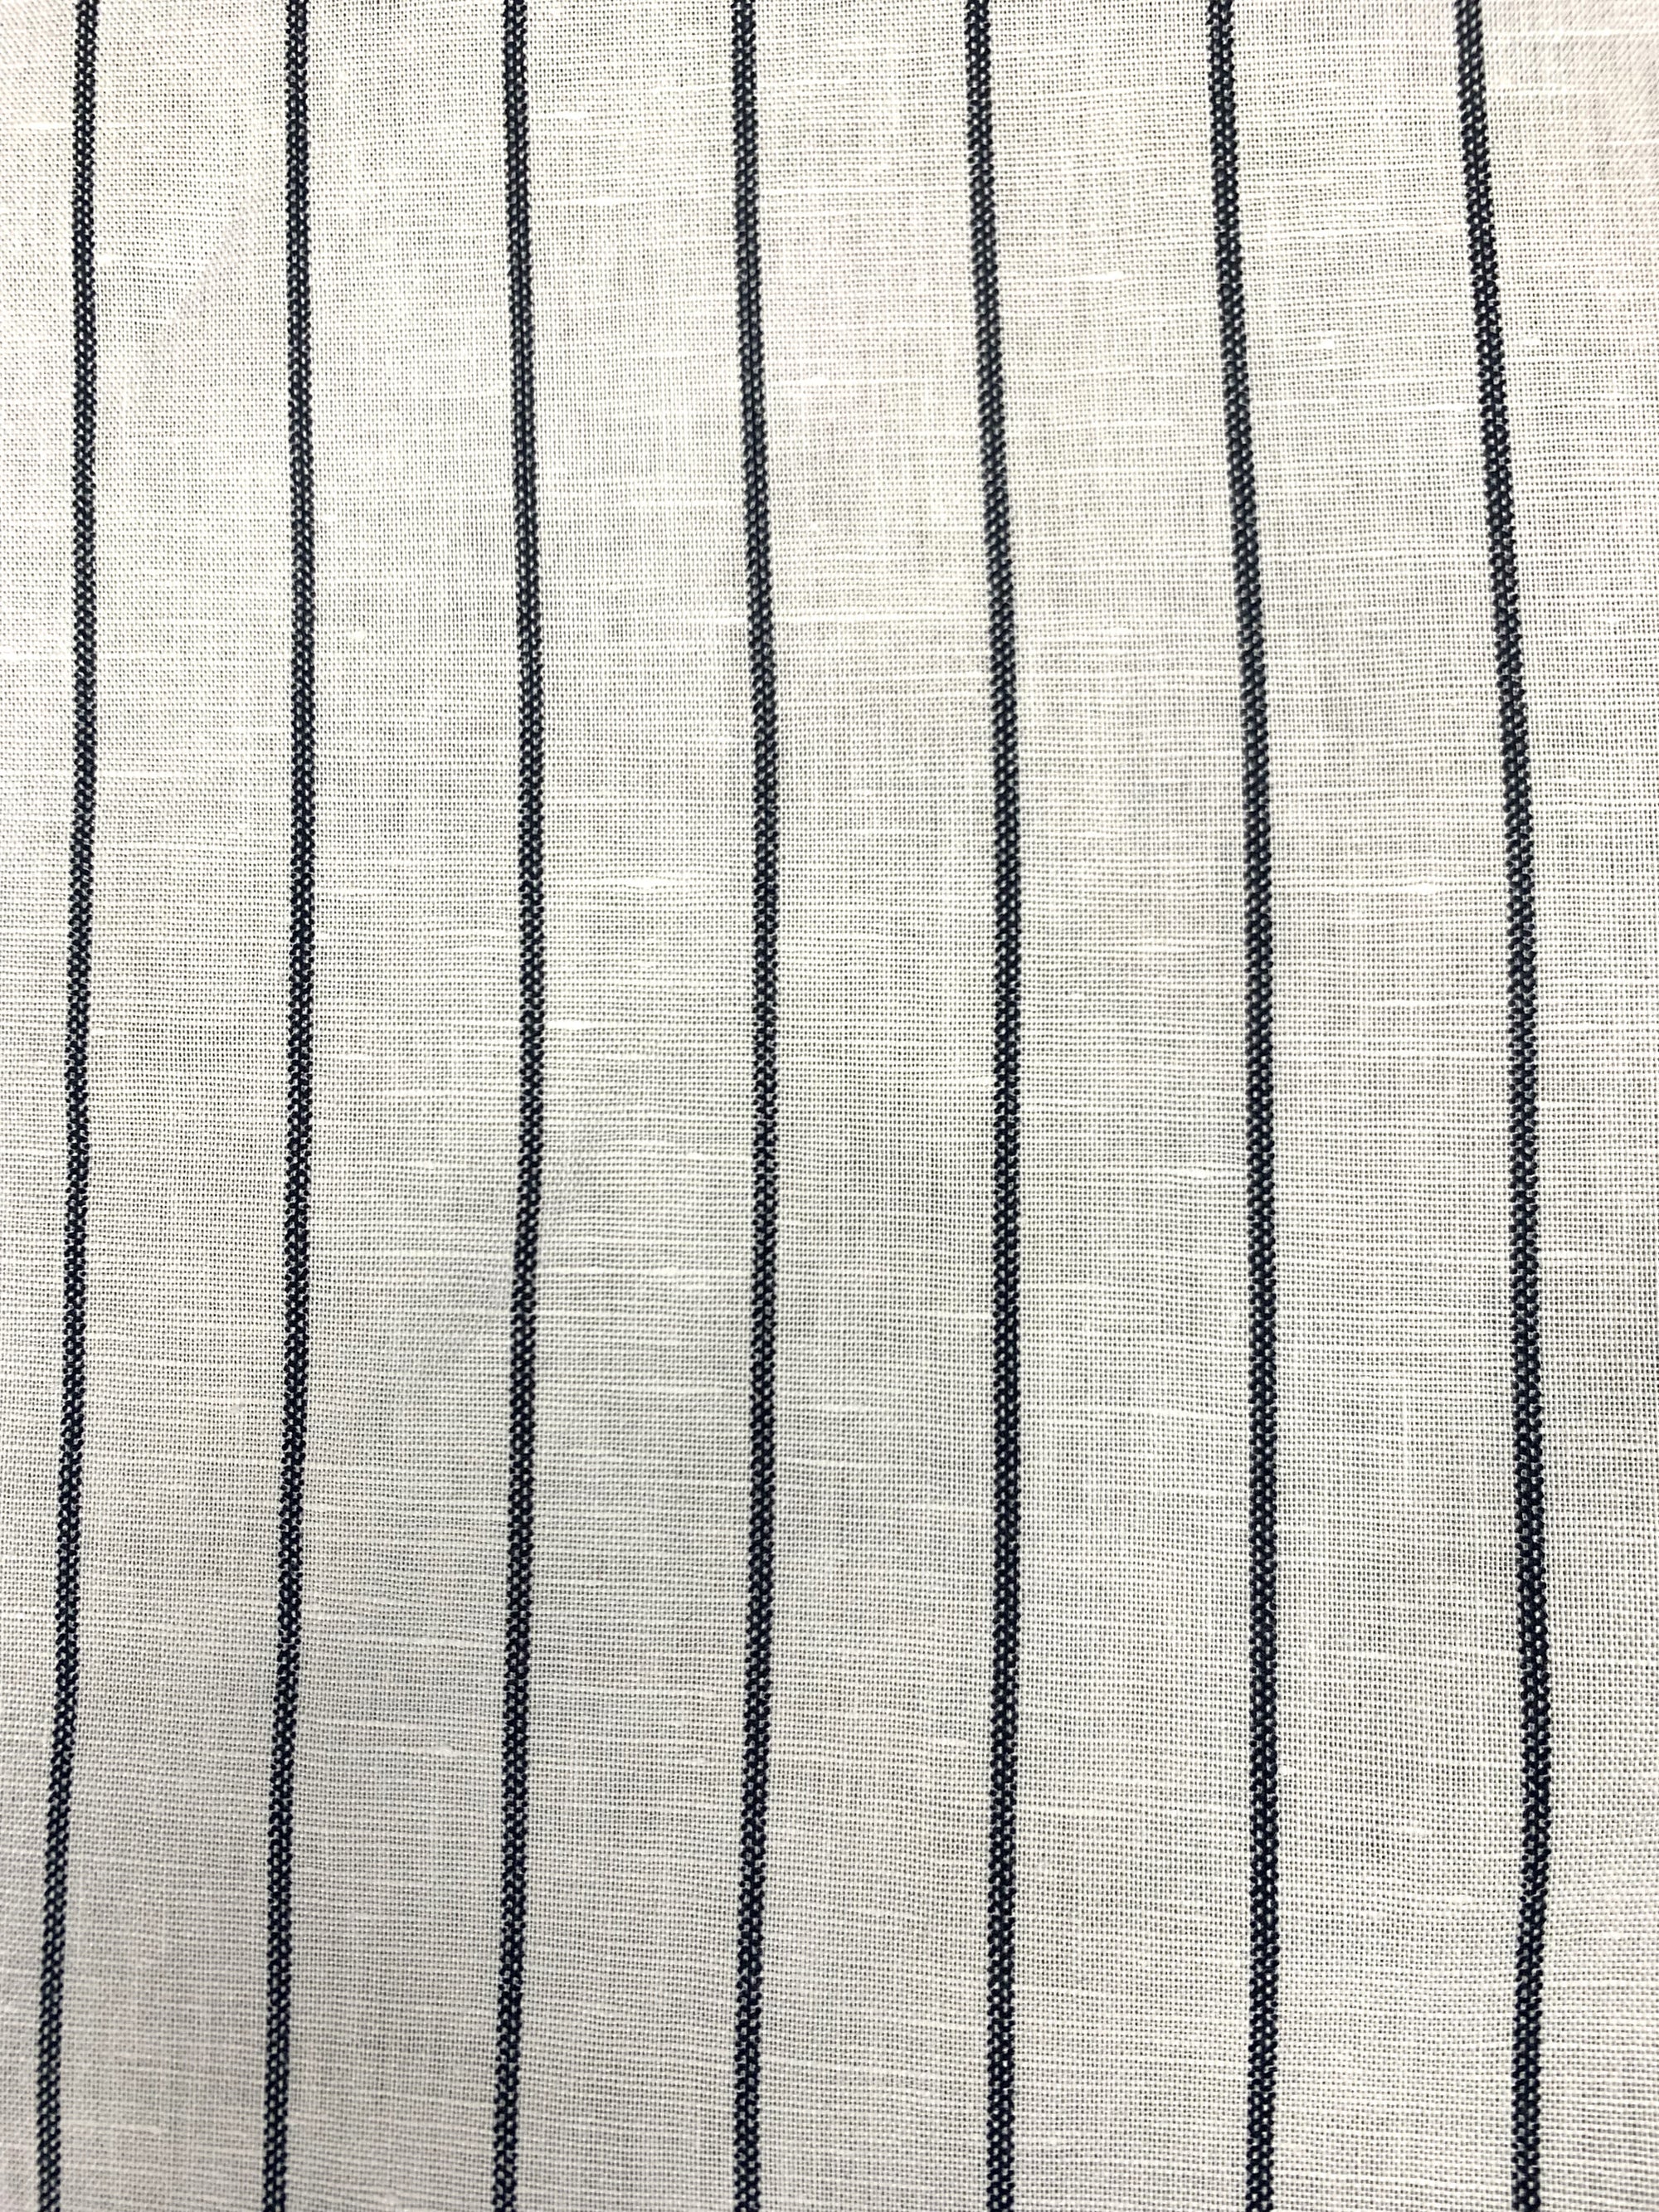 White linen cotton fabric with black stripes in a spiral in one inch increments horizontally